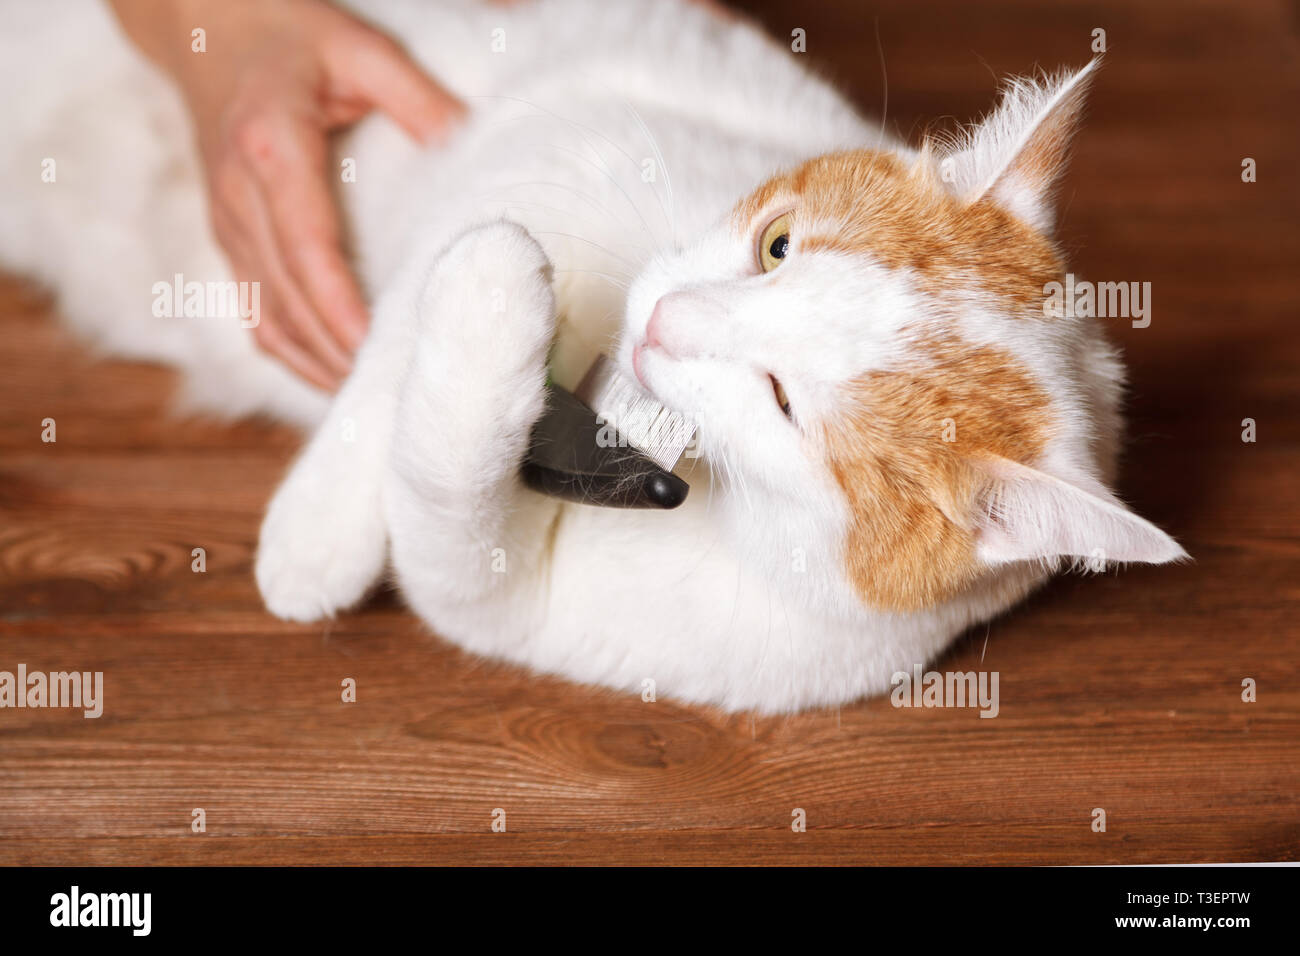 White-red sweet cat holding a comb. Combing domestic cats. The concept of pet care. Stock Photo